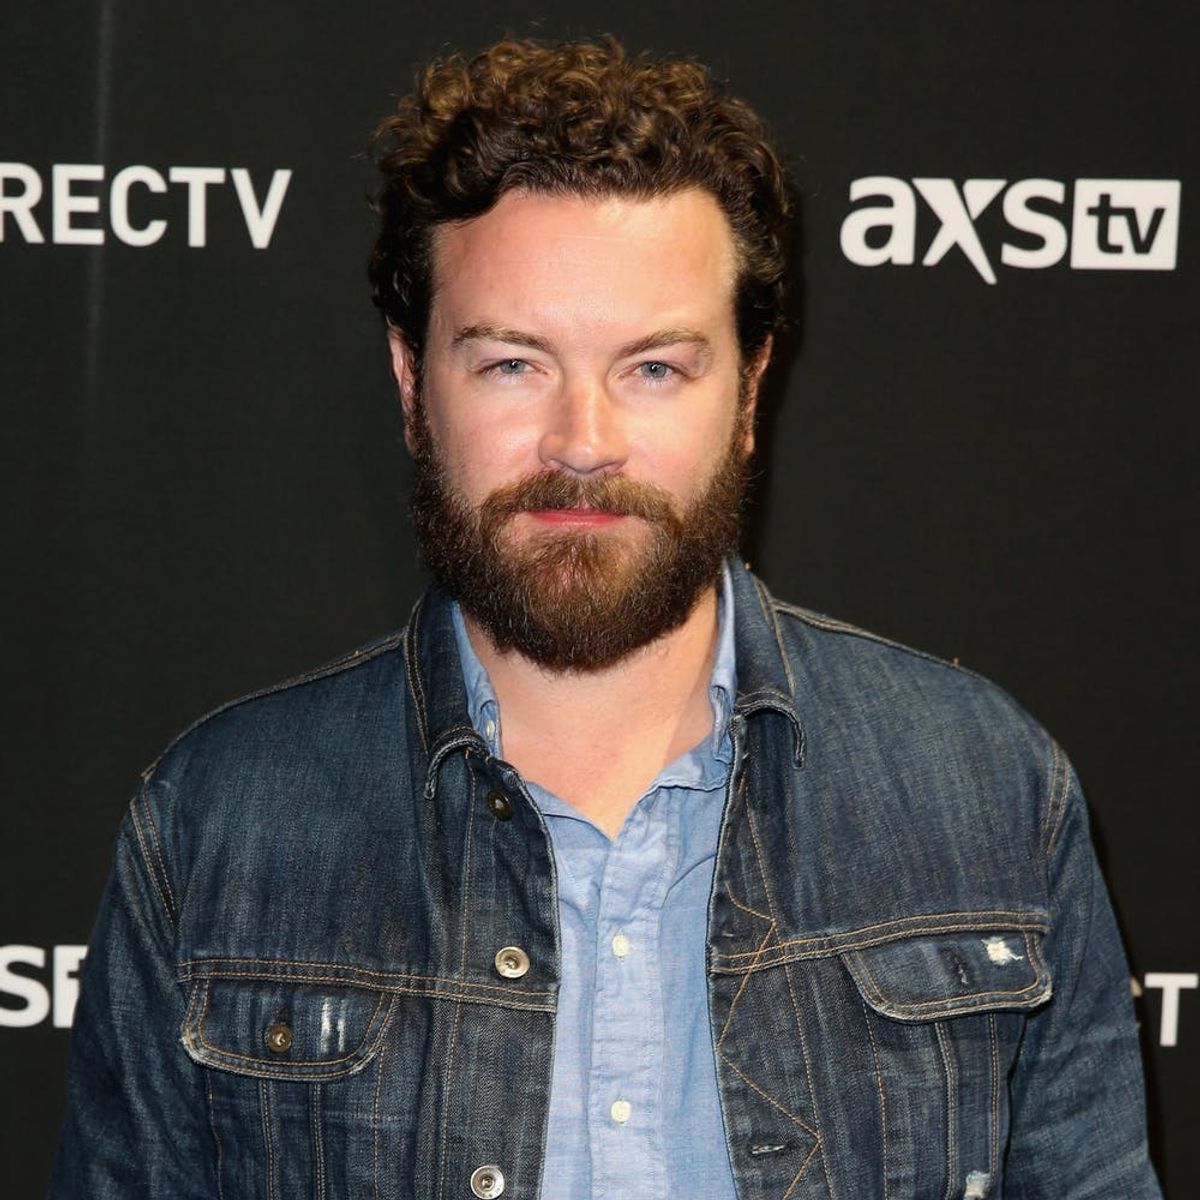 Netflix Drops Danny Masterson from ‘The Ranch’ Amid Sexual Assault Allegations